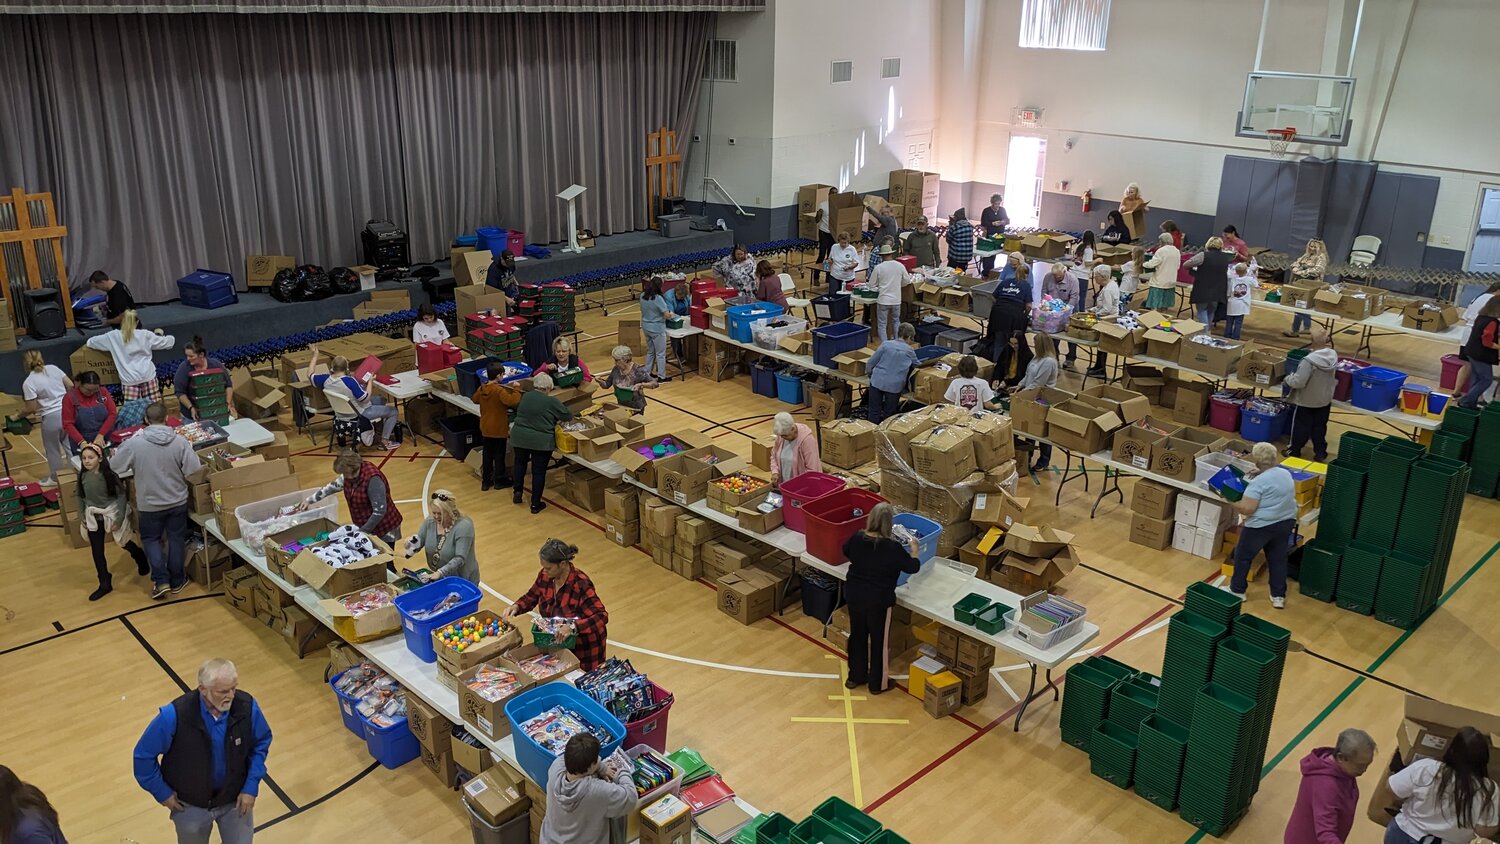 Volunteers from Welcome Hill Baptist Church, part of the Conasauga Baptist Association, gather in their Multi-Ministry Building and form assembly lines to pack shoeboxes for Operation Christmas Child. (Photo/Welcome Hill Baptist Church)